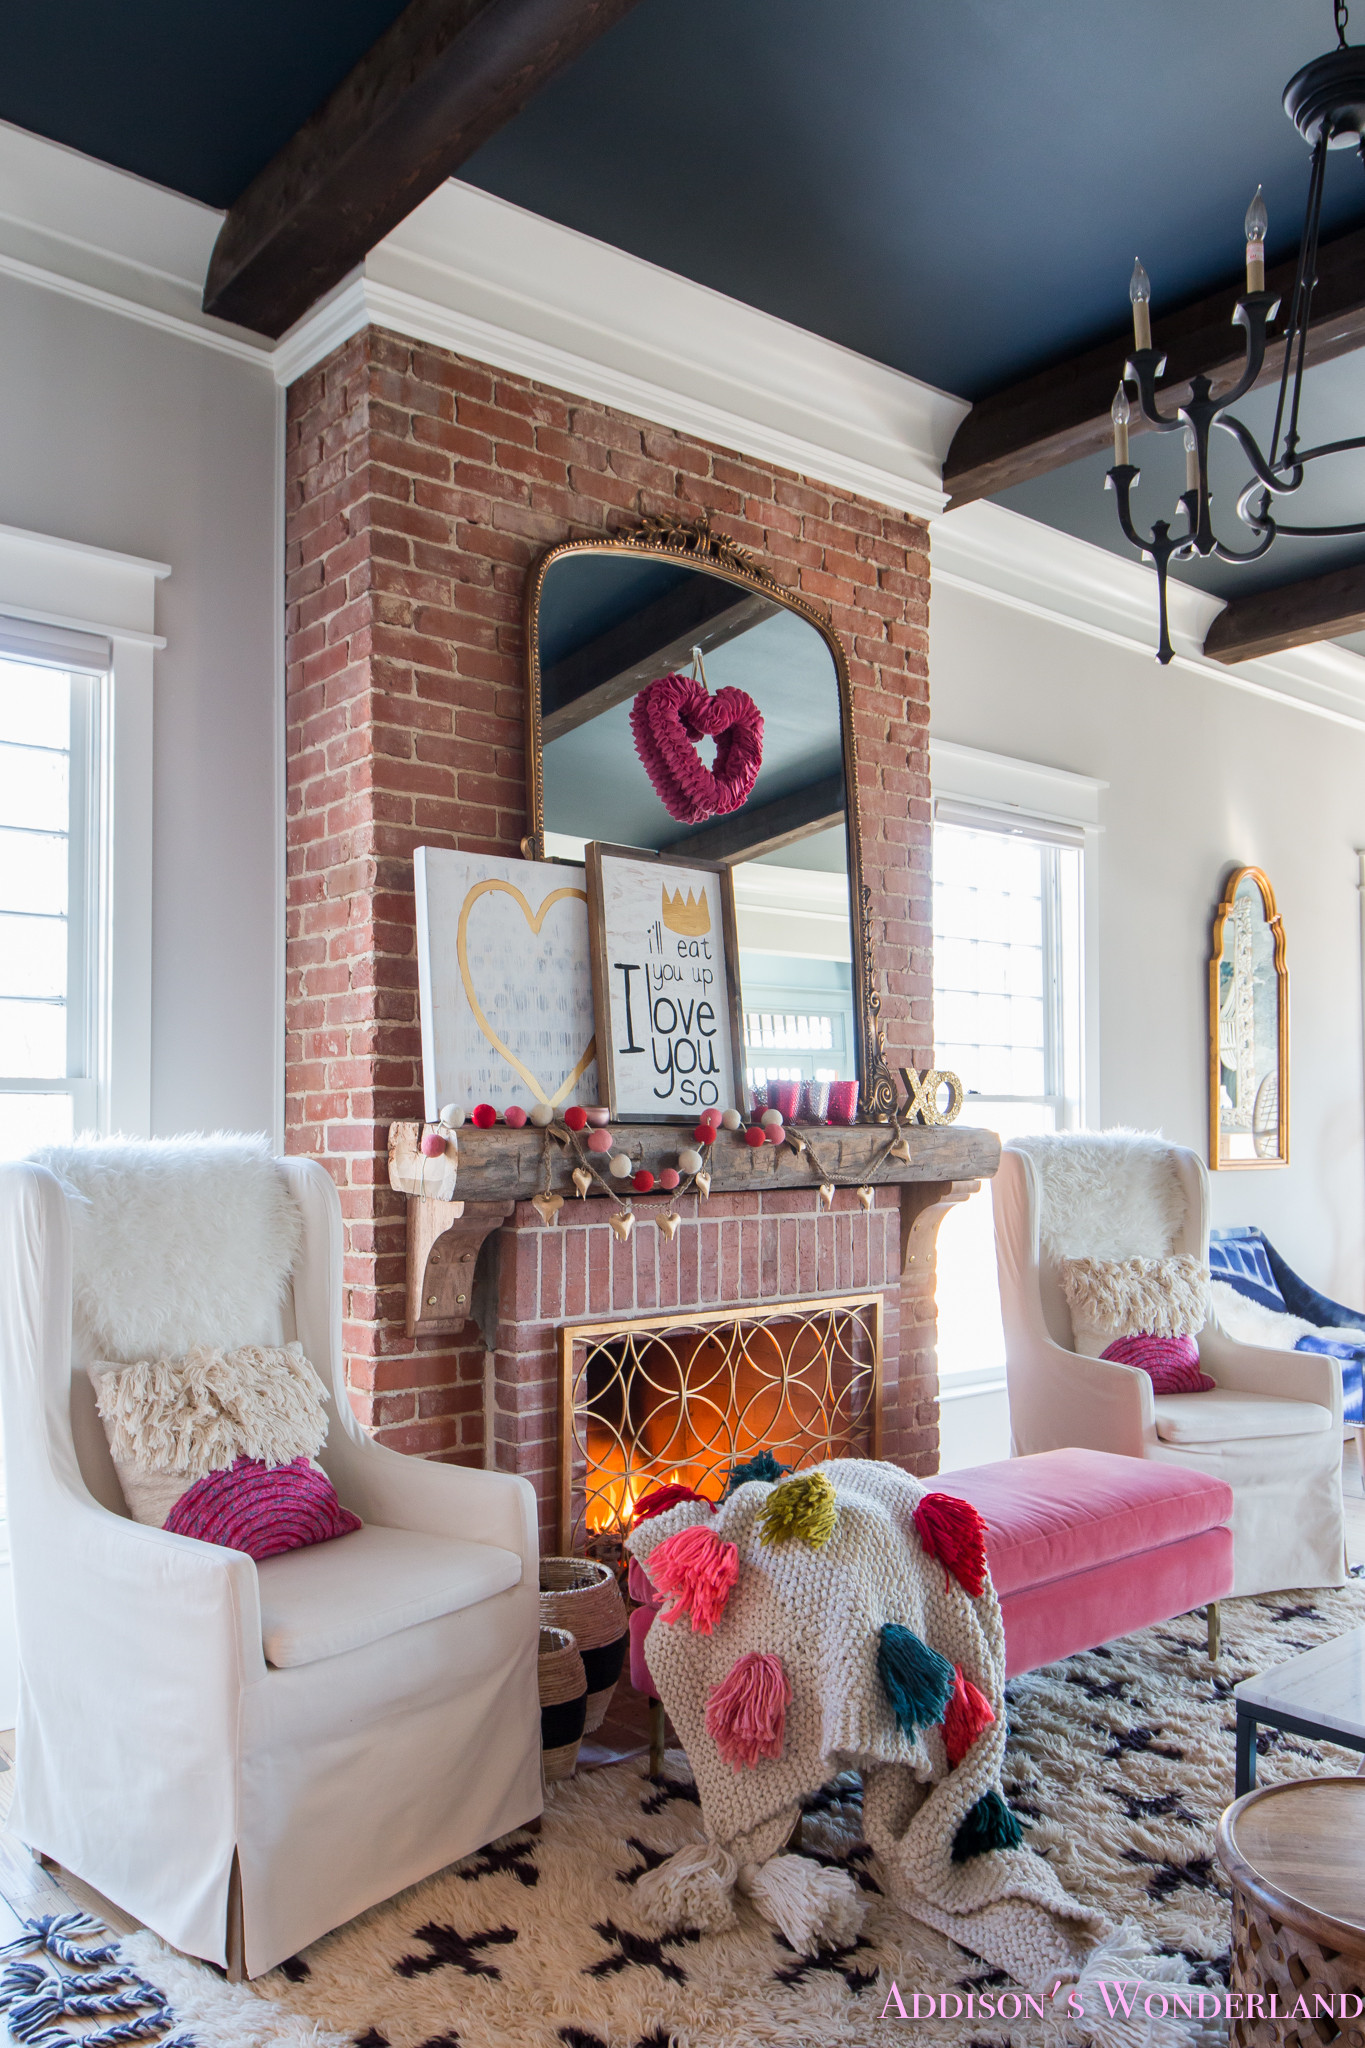 Living Room Decorations Ideas
 Our Colorful Whimsical & Elegant Valentine s Day Living